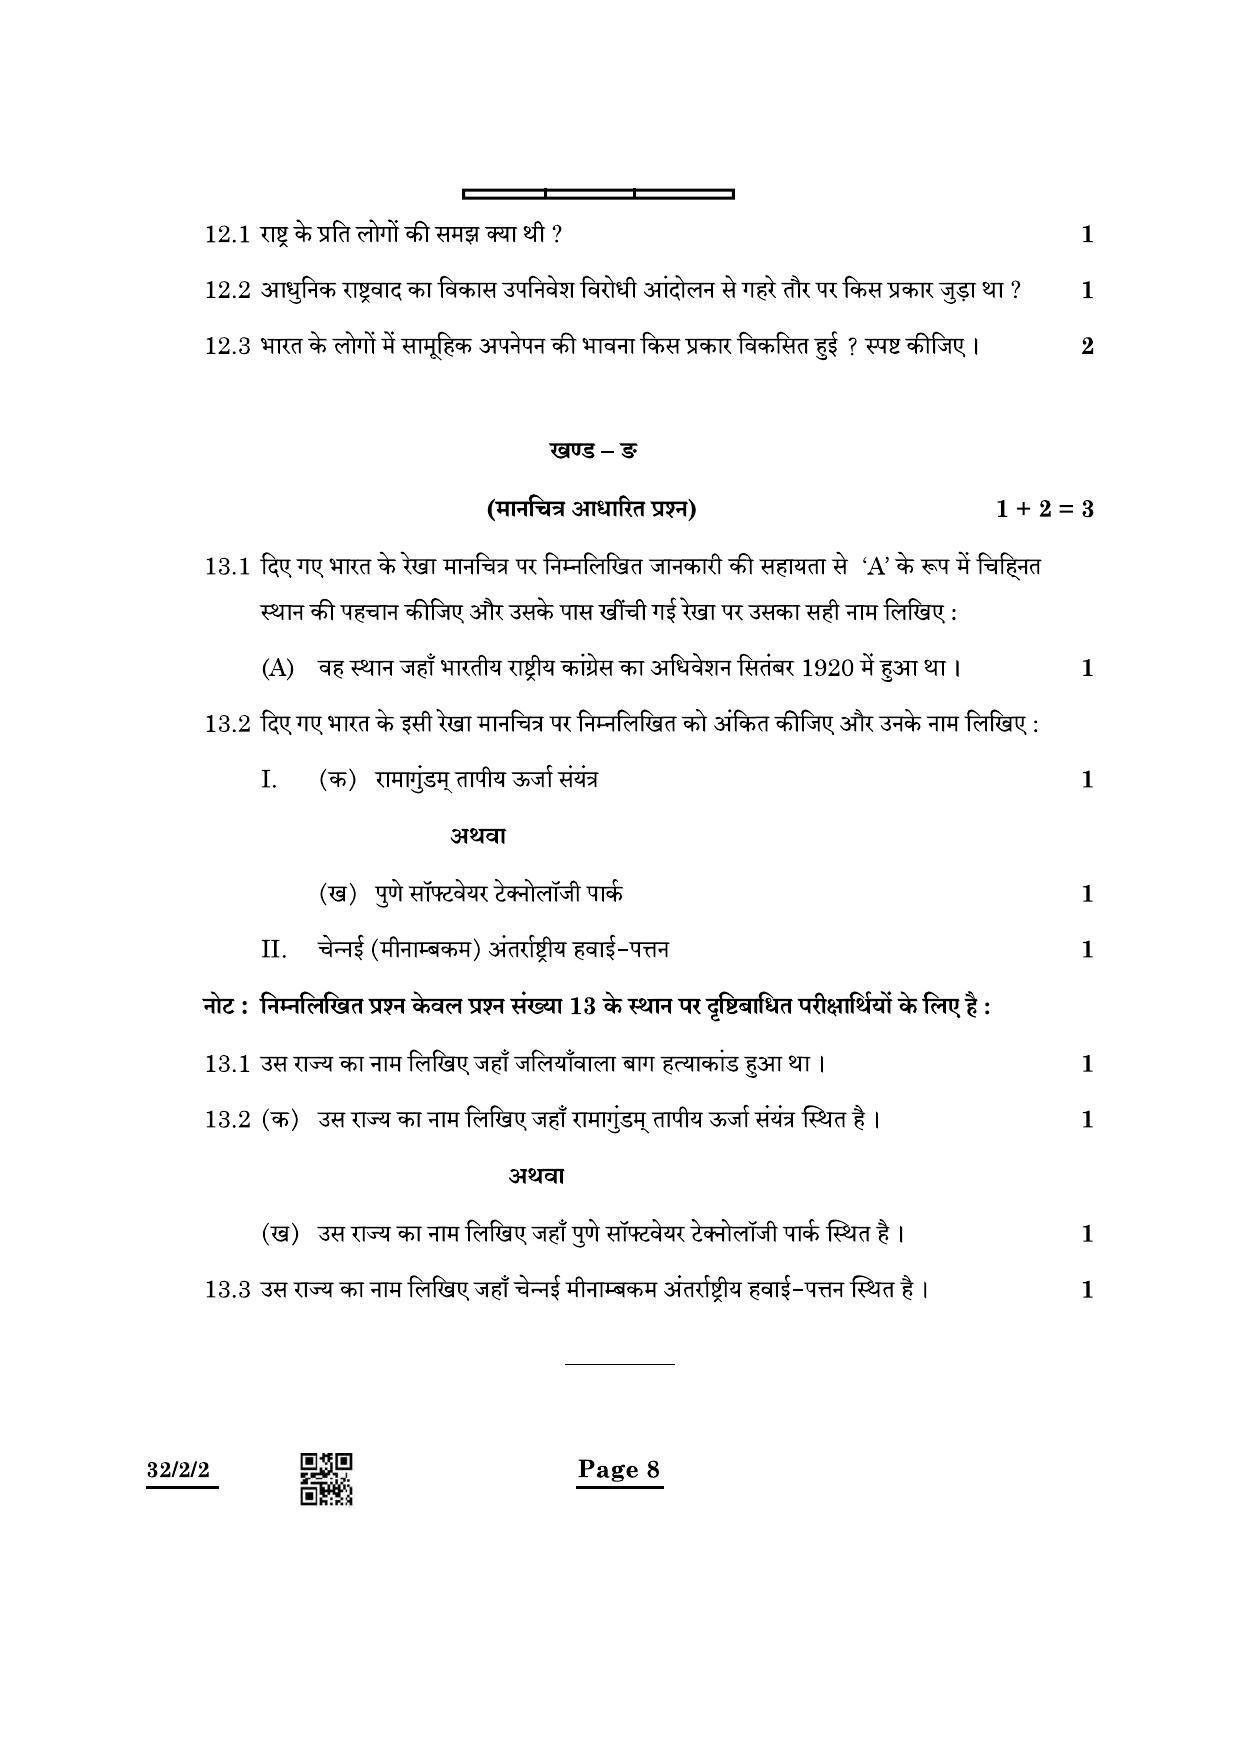 CBSE Class 10 32-2-2 Social Science 2022 Question Paper - Page 8